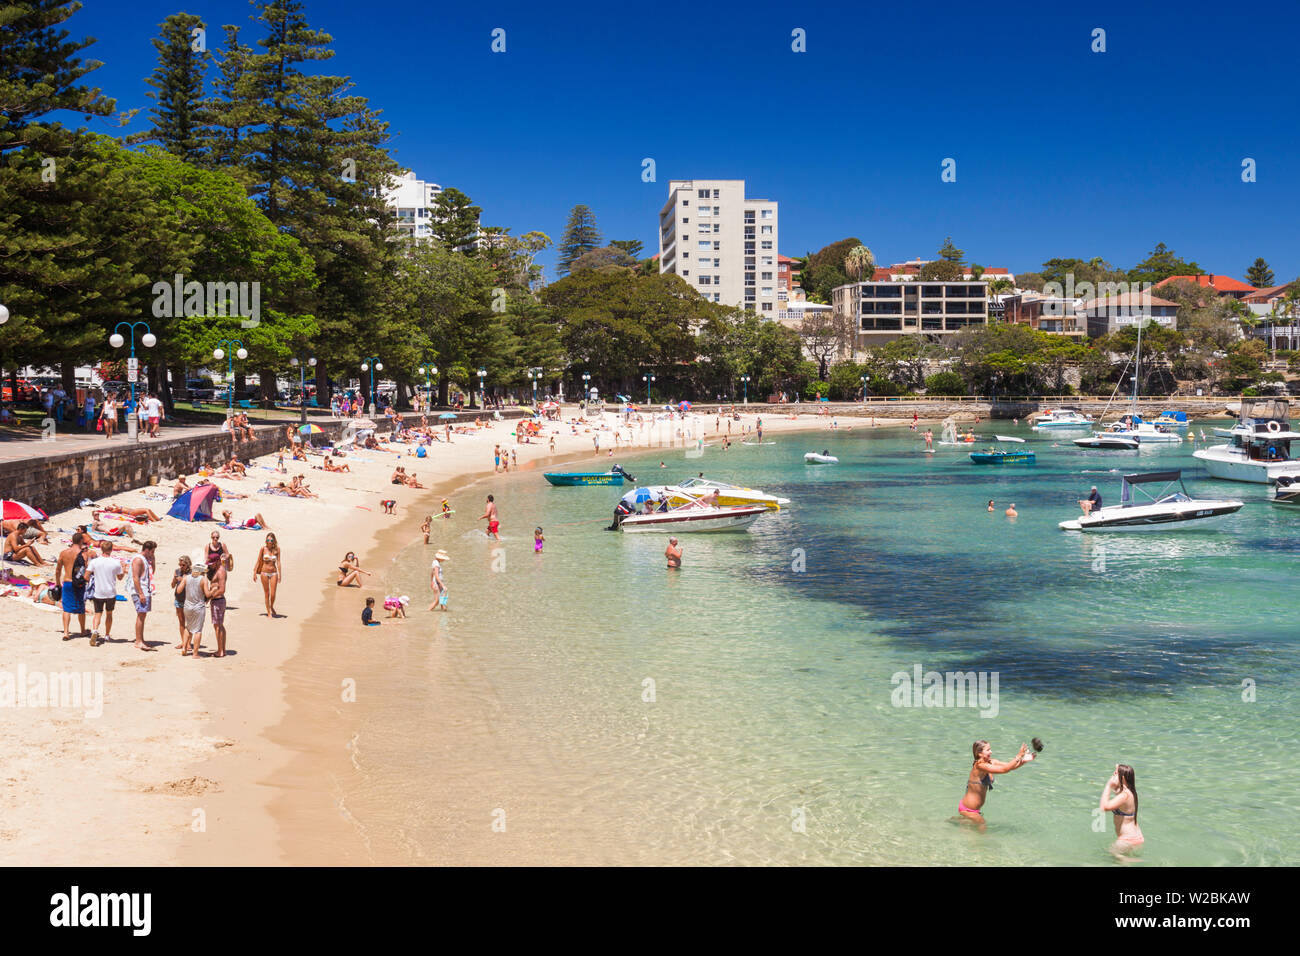 Australia, New South Wales, NSW, Sydney, Manly, Manly Cove Beach Stock Photo